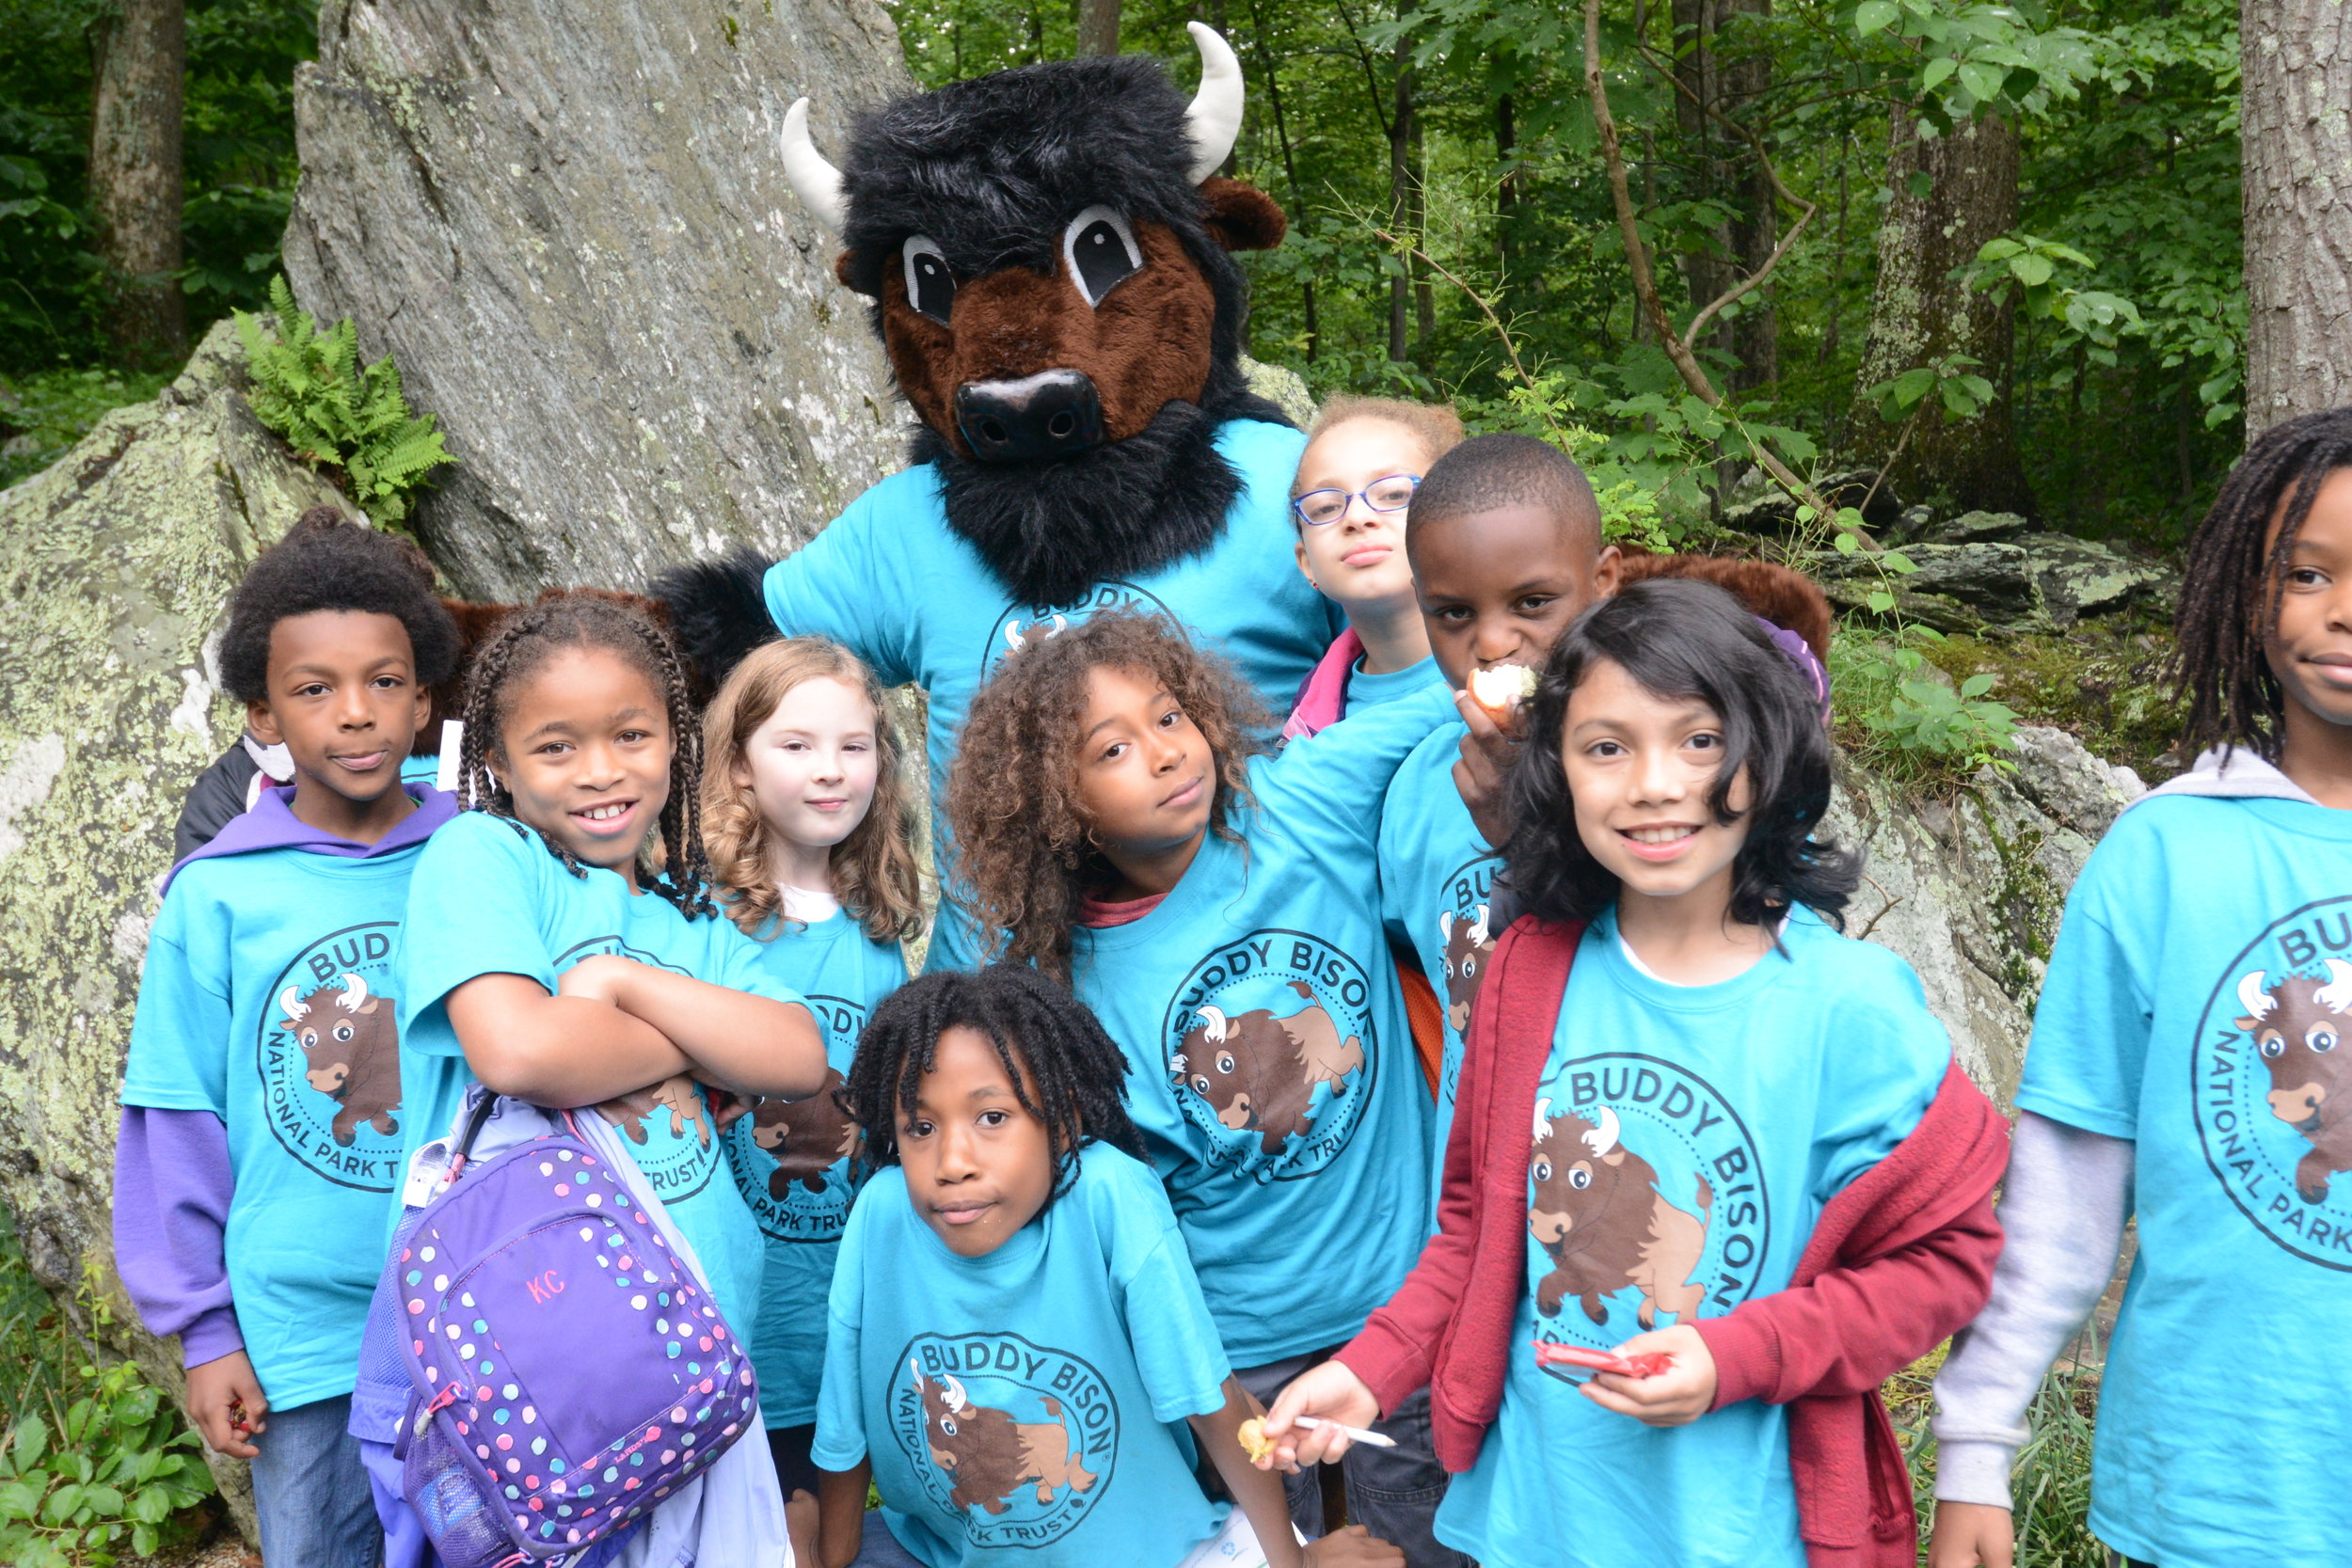 Children participate in an outdoor recreation program with Buddy Bison of the National Park Trust